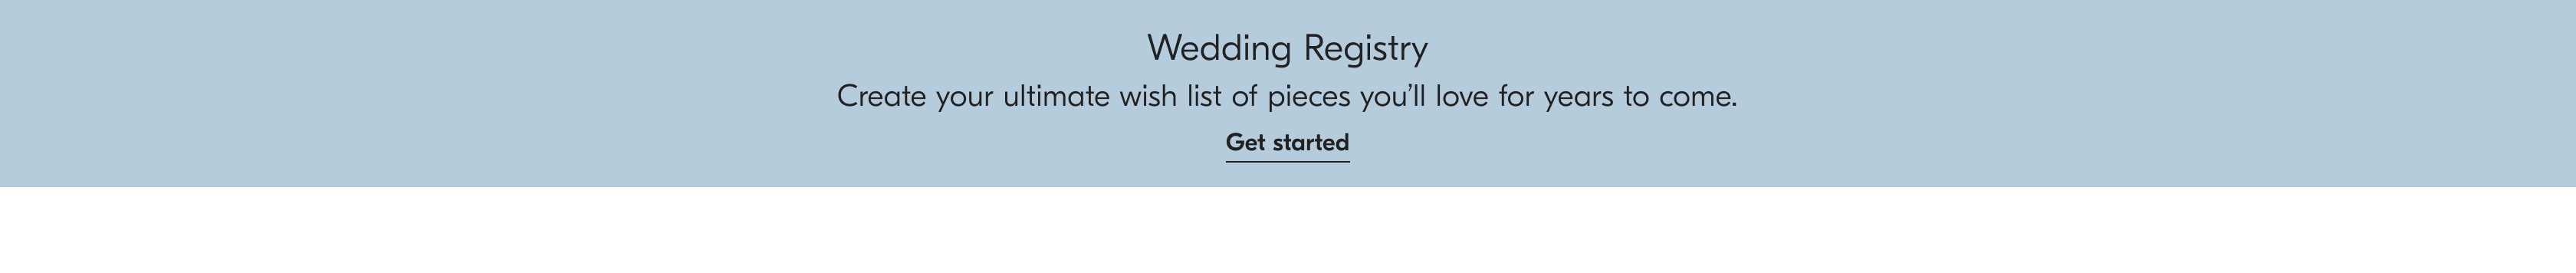 Wedding Registry. Create your ultimate wish list of pieces you'll love for years to come. Get started.